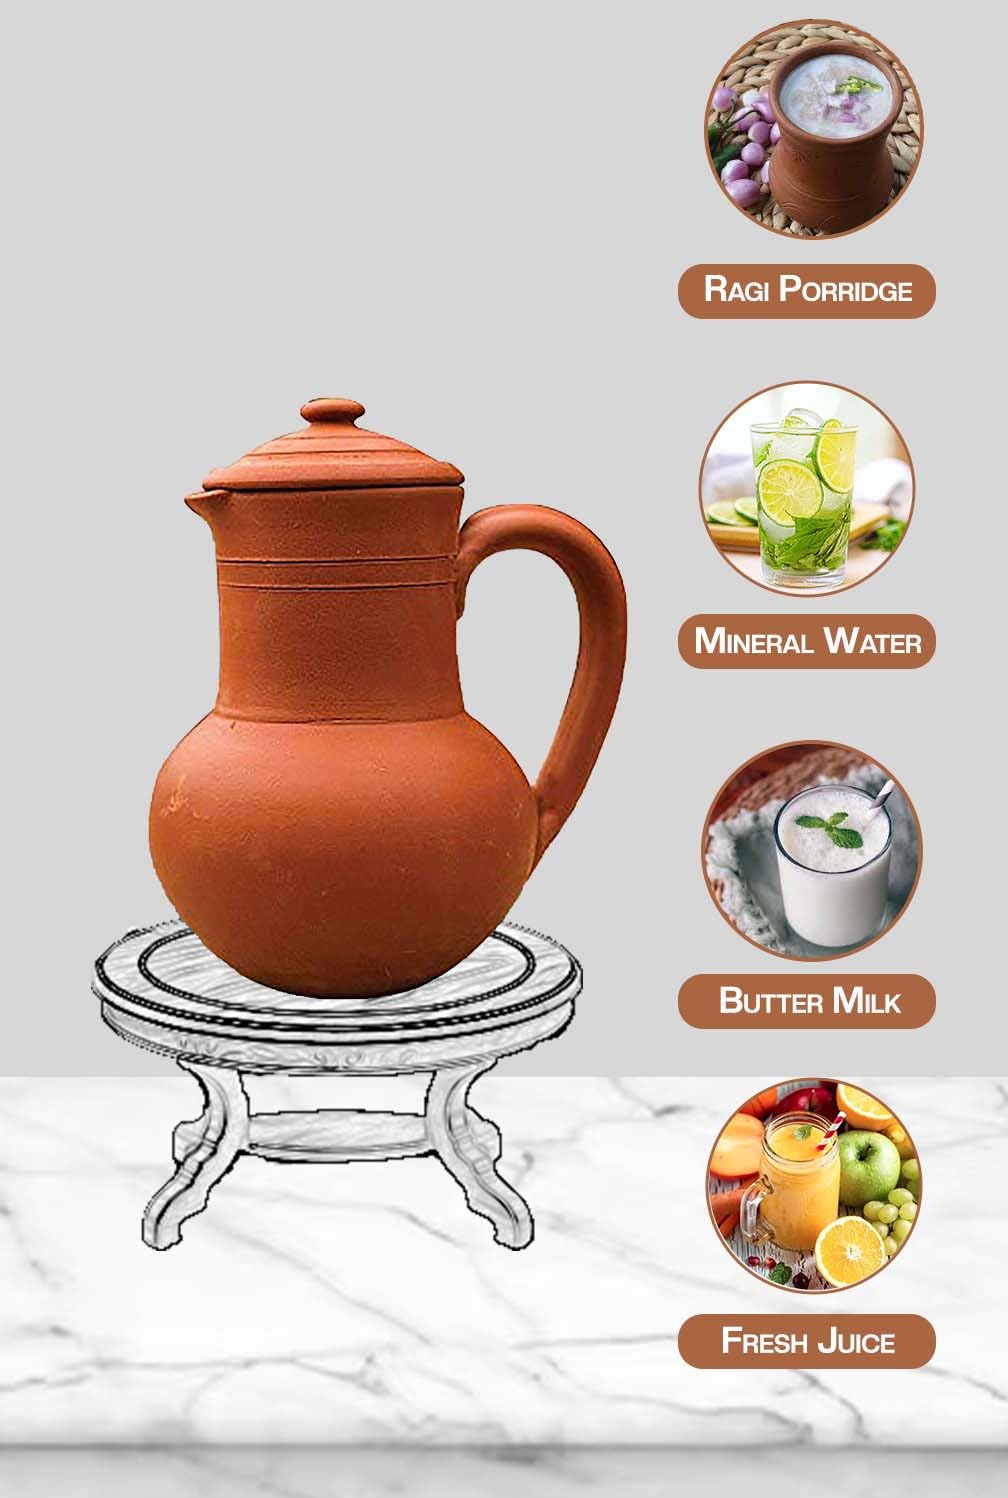 Village Decor Handmade Clay Water Jug With Lid | Carafes Pitcher Capacity 67 oz 2000 ml.